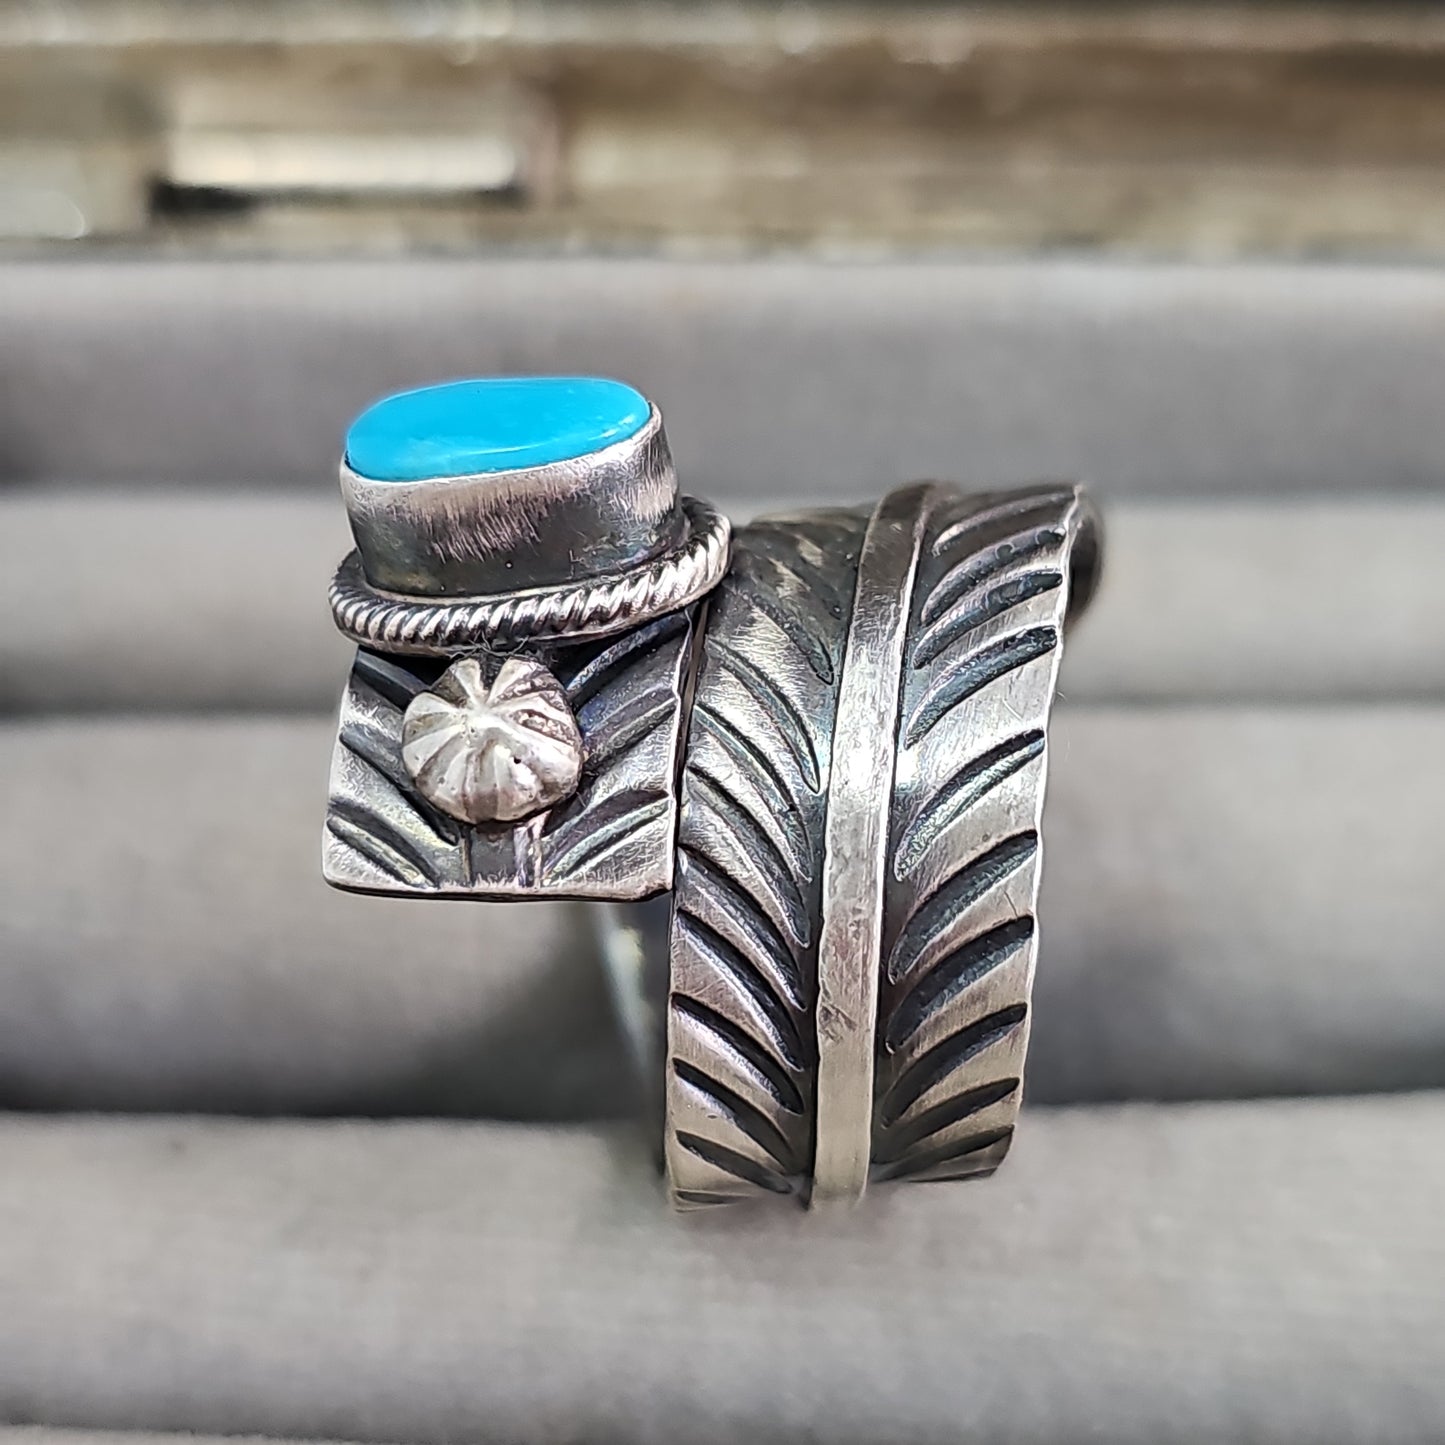 Heavy turquoise feather ring